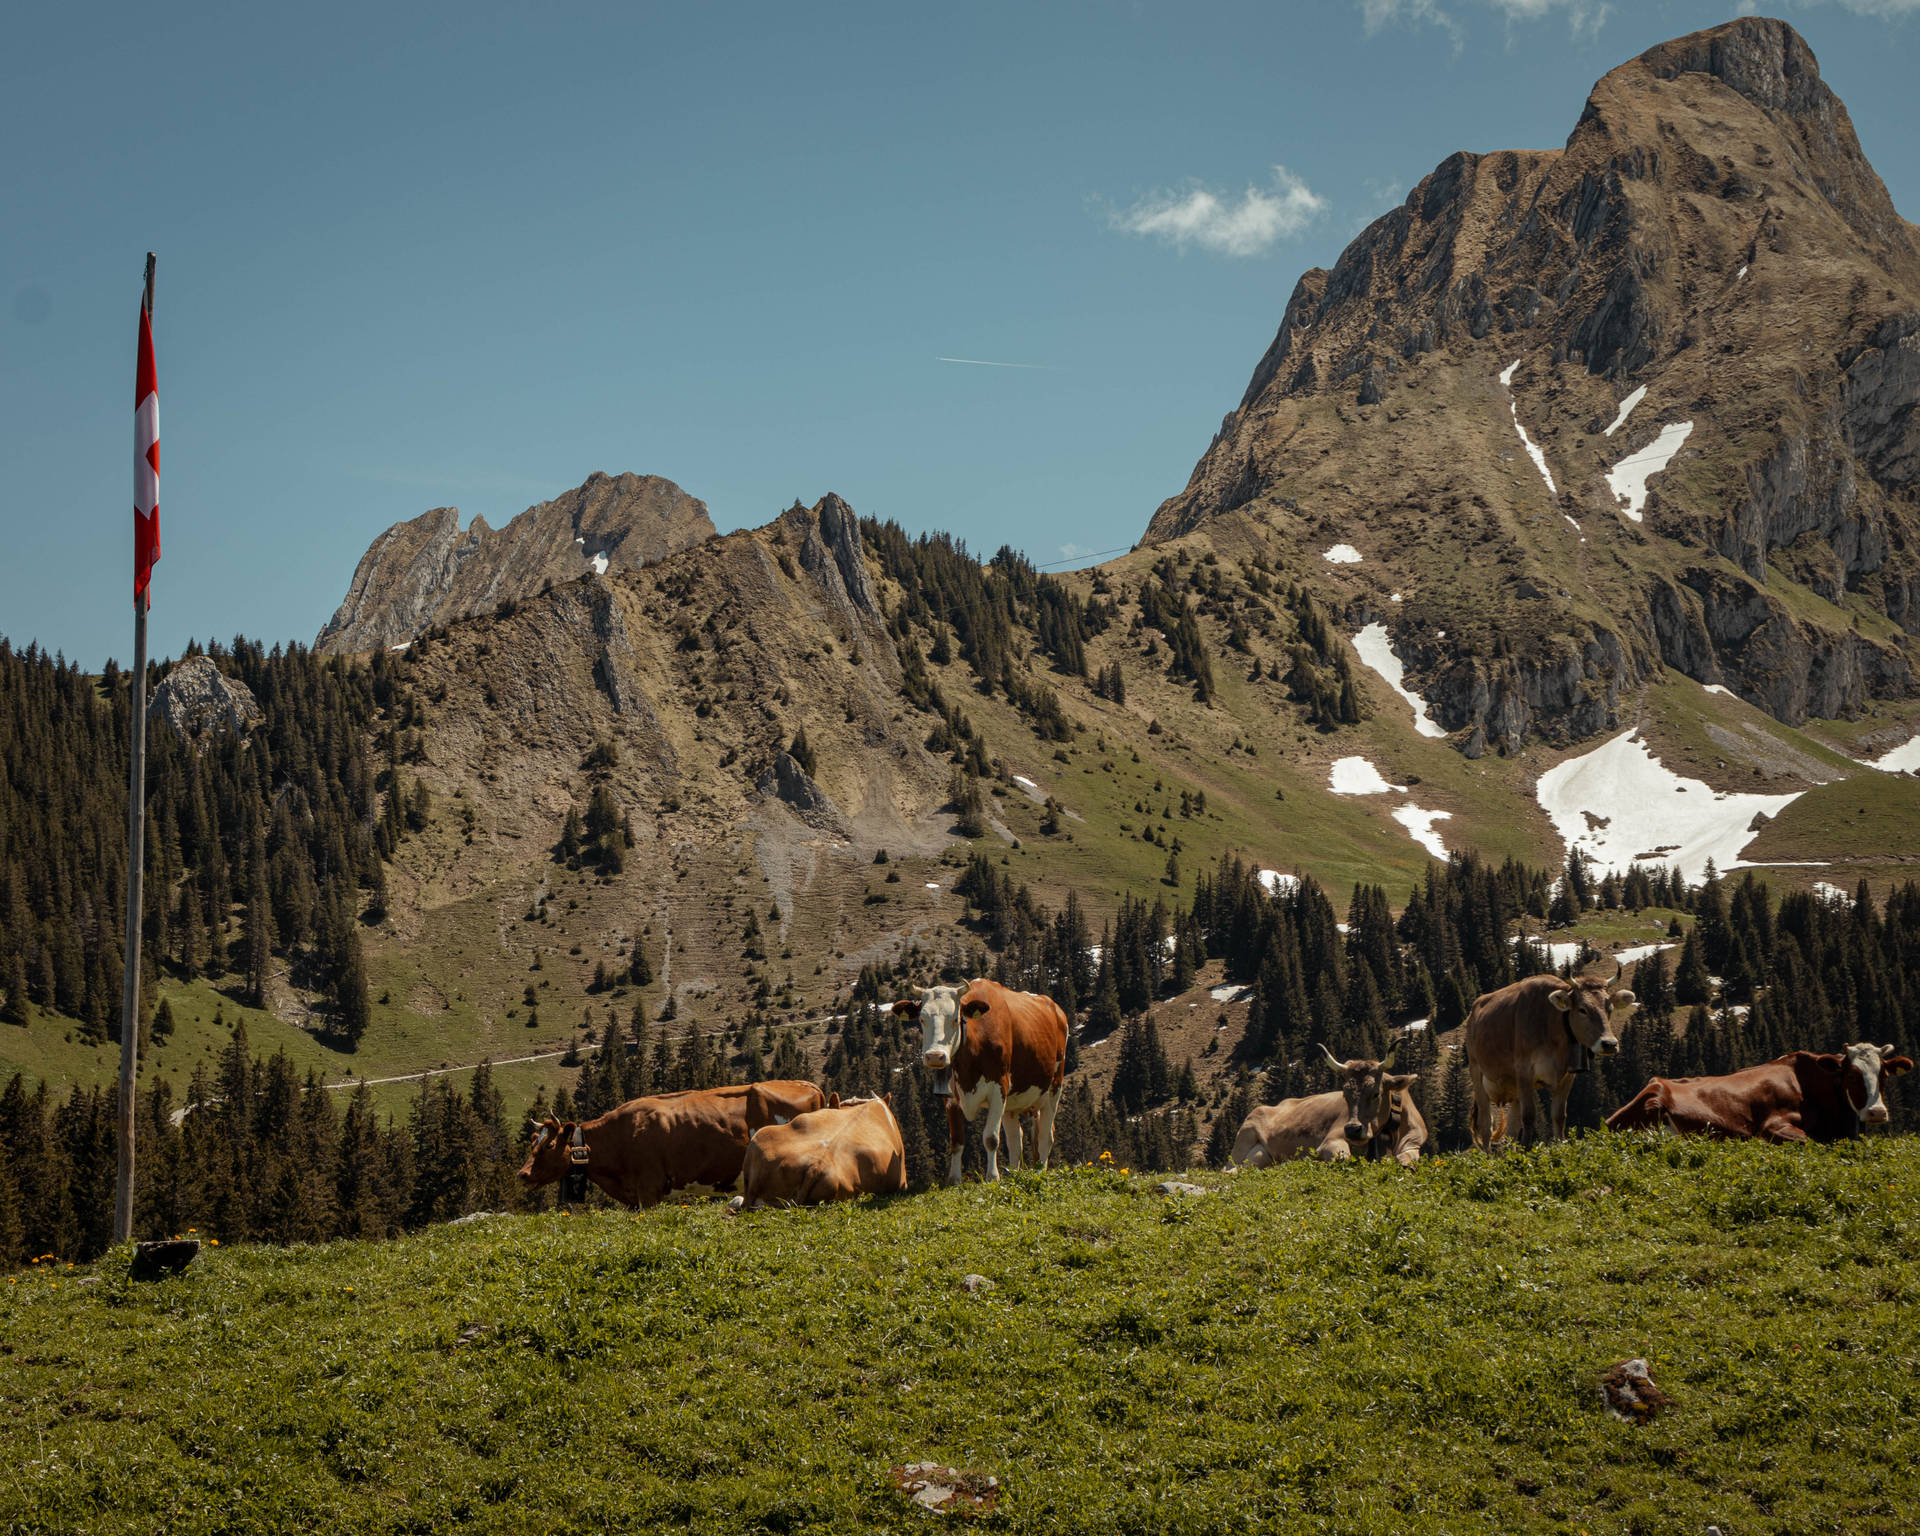 Cute Cows On Grass With Snowy Mountain